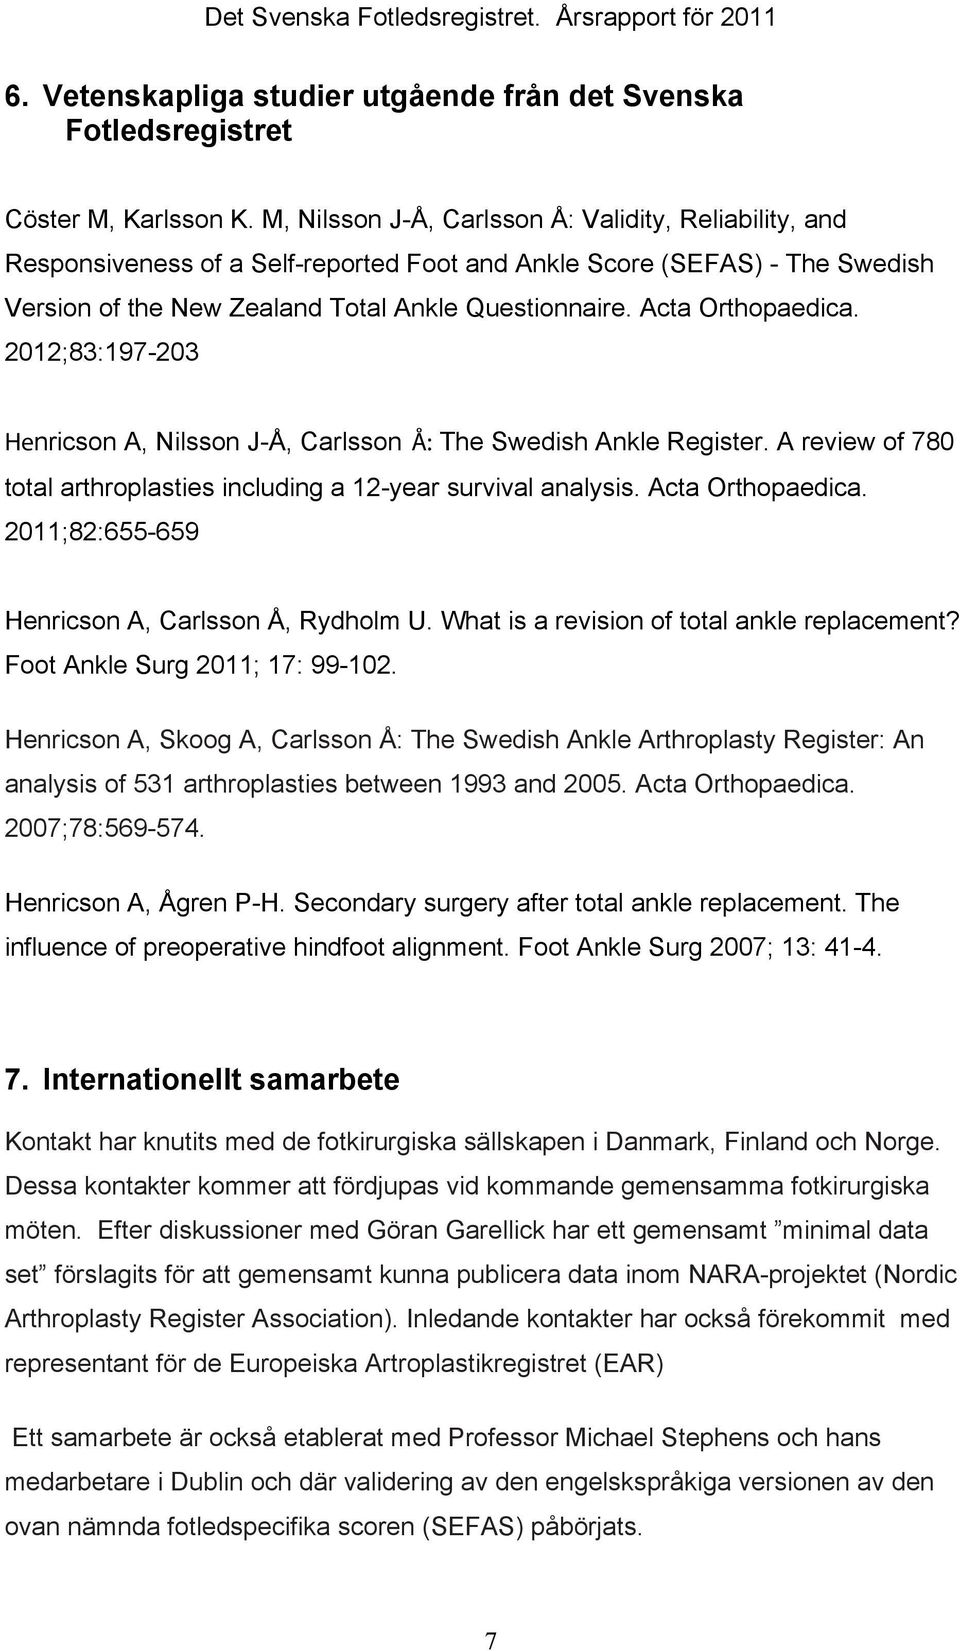 Acta Orthopaedica. 2012;83:197-203 Henricson A, Nilsson J-Å, Carlsson Å: The Swedish Ankle Register. A review of 780 total arthroplasties including a 12-year survival analysis. Acta Orthopaedica.